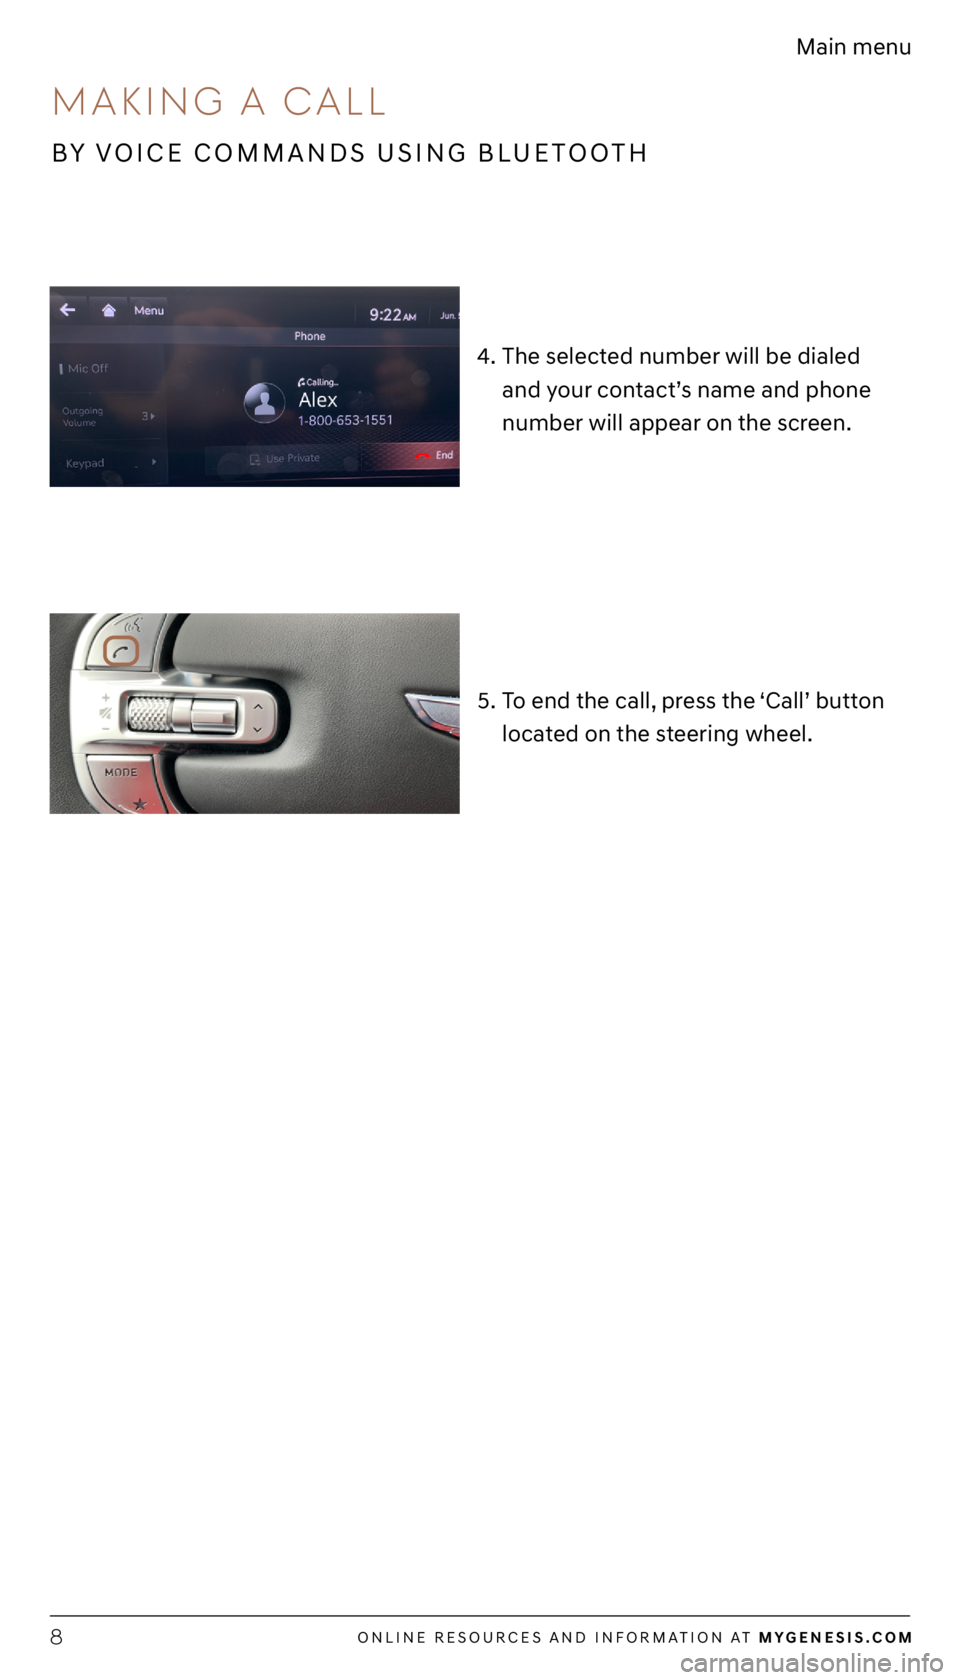 GENESIS G80 2021  Getting Started Guide ONLINE RESOURCES AND INFORMATION AT MYGENESIS.COM8
Main menu
5.
4.
To end the call, press the ‘Call’ button 
located on the steering wheel.
The selected number will be dialed 
and your contact’s